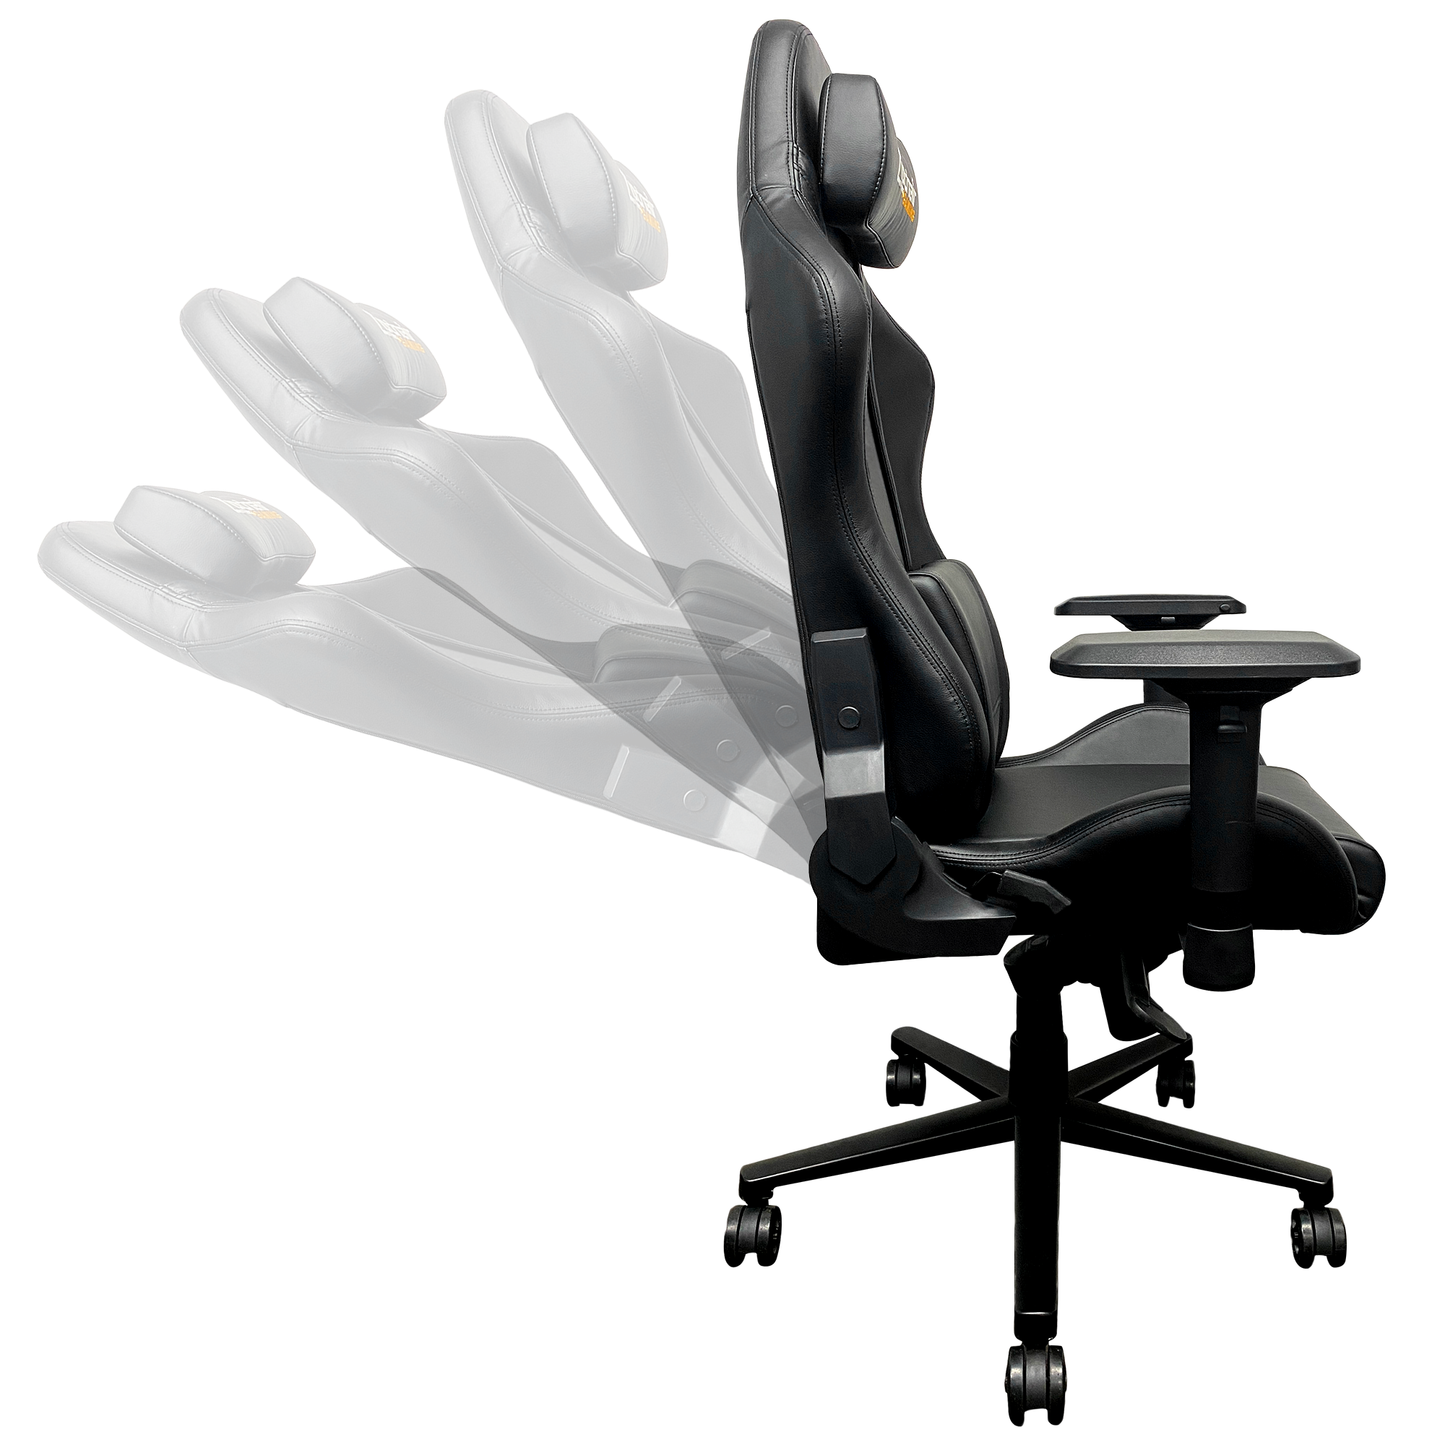 Xpression Pro Gaming Chair with Baltimore Orioles Bird Logo